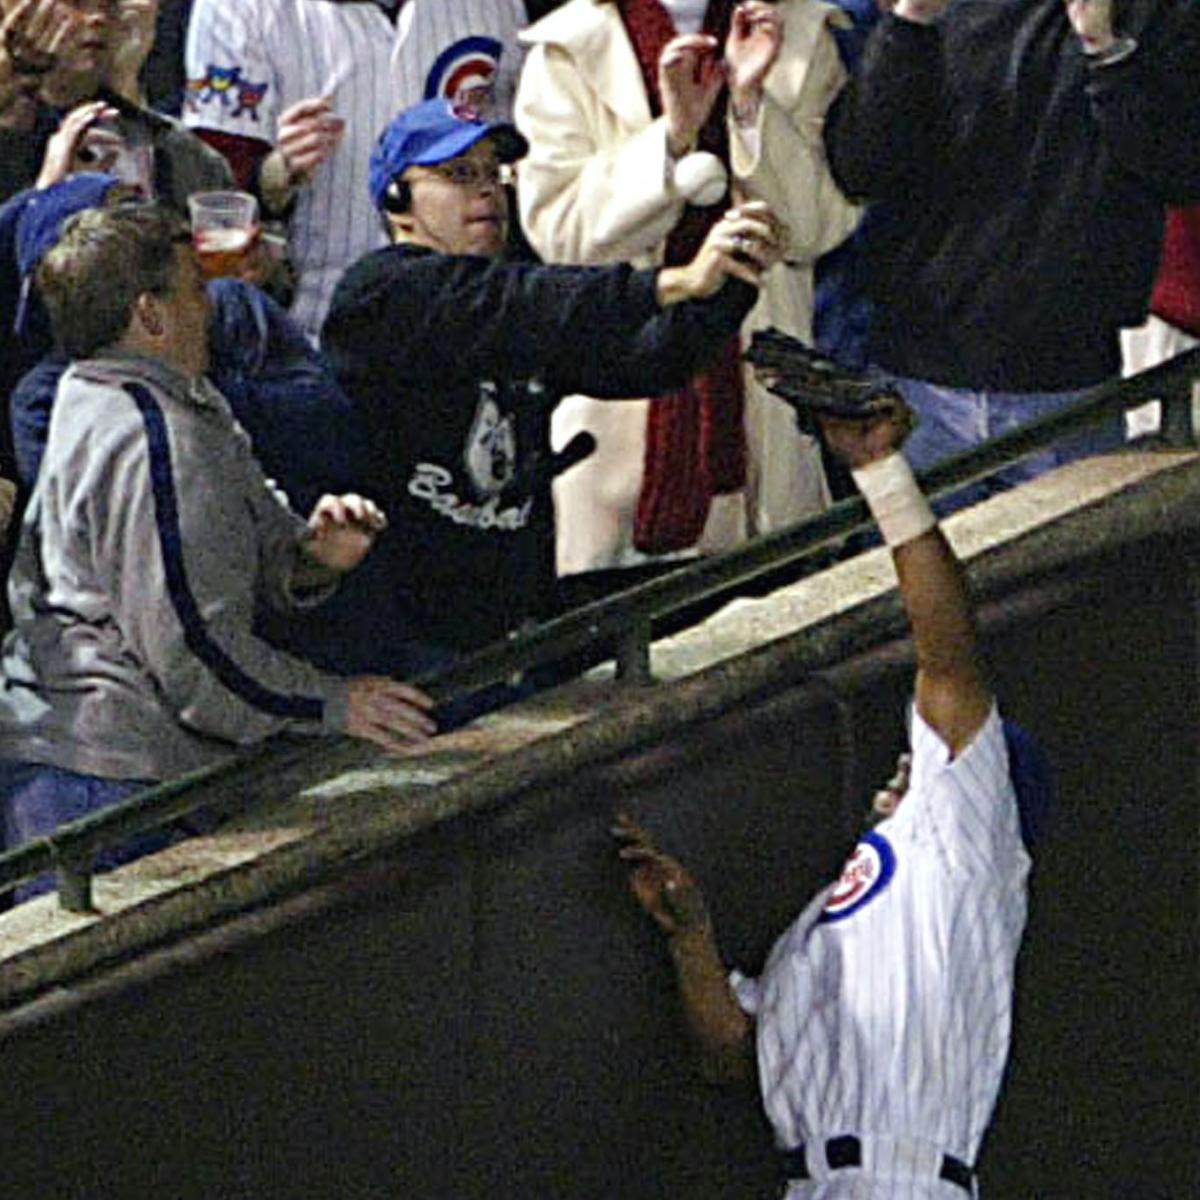 Cubs Memes - Steve Bartman just received something that